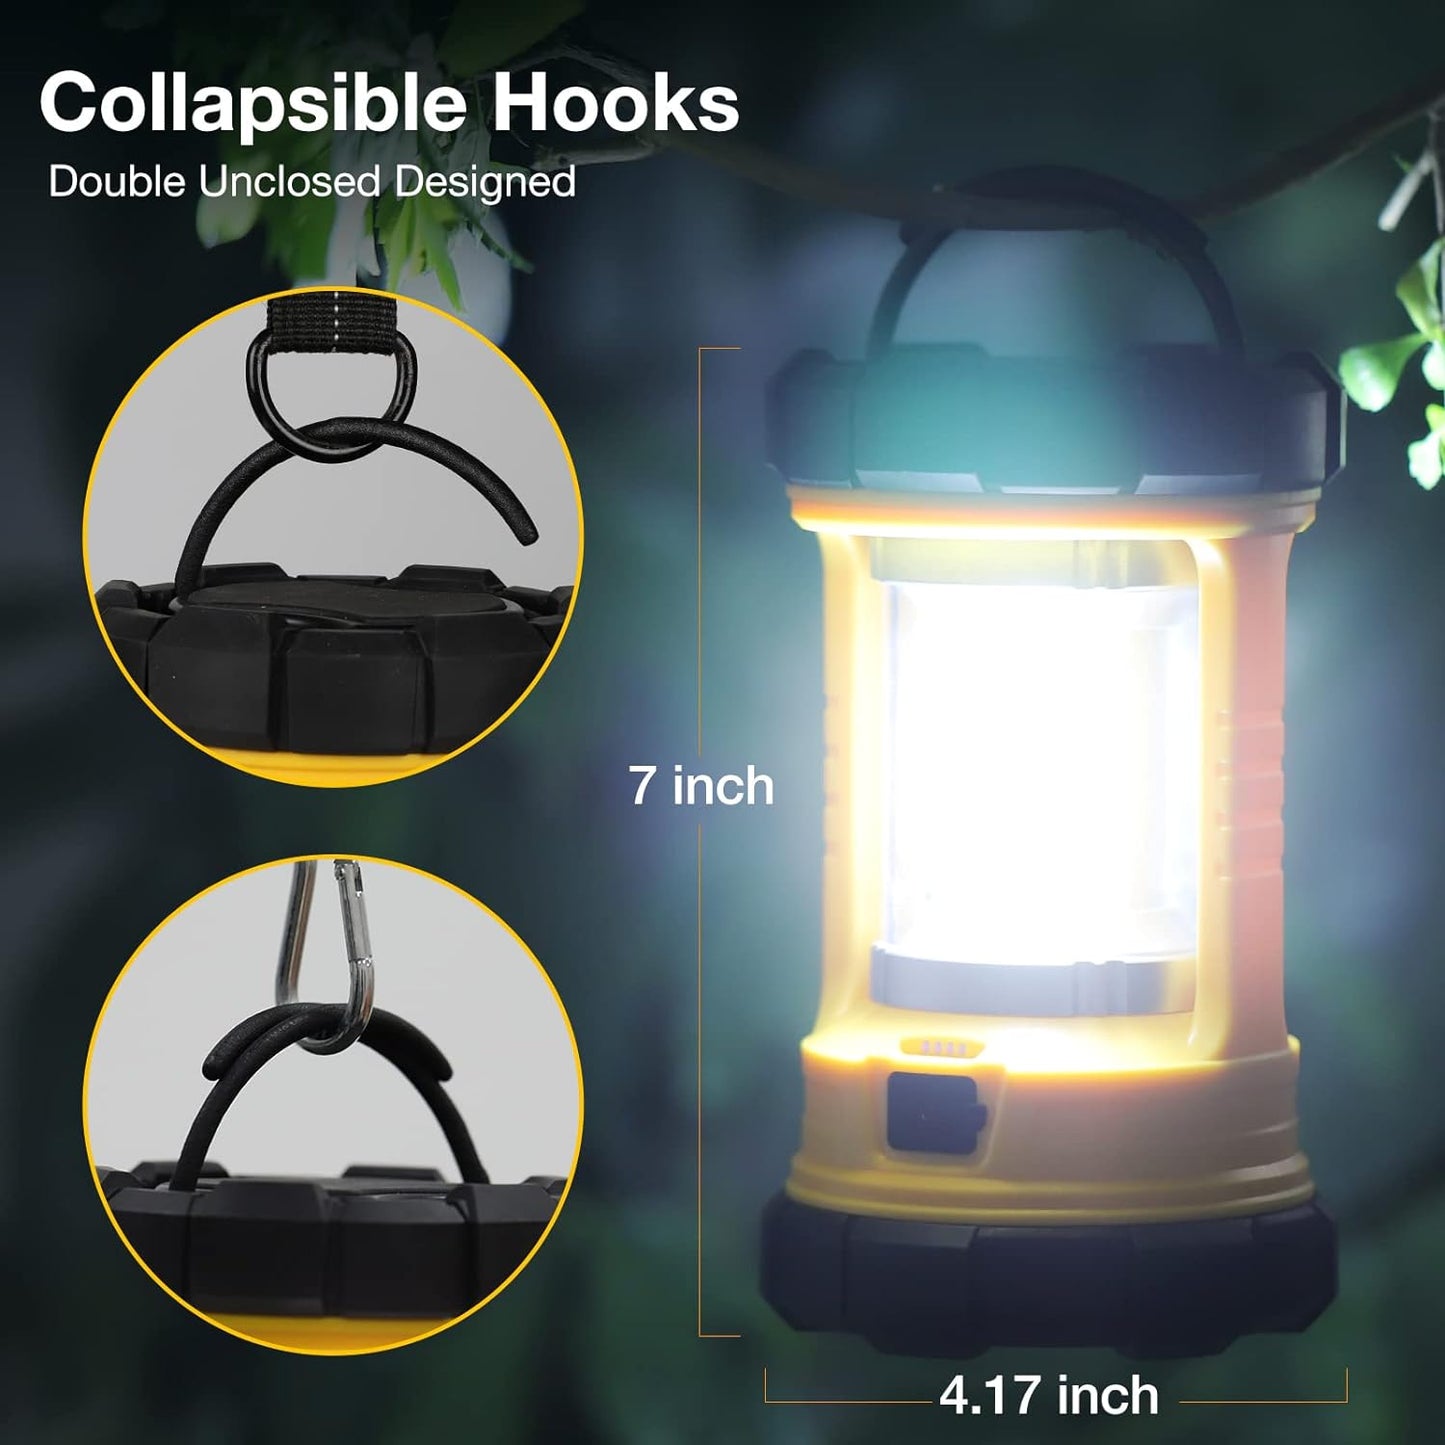 Camping Lantern, 3200LM Bright Camping Lights, 4600mAh Power Bank & Rechargeable LED Lantern, Lantern Flashlight for Power Outages\/Hurricane\/Emergency, CT CAPETRONIX Camping Accessories (2-Pack)